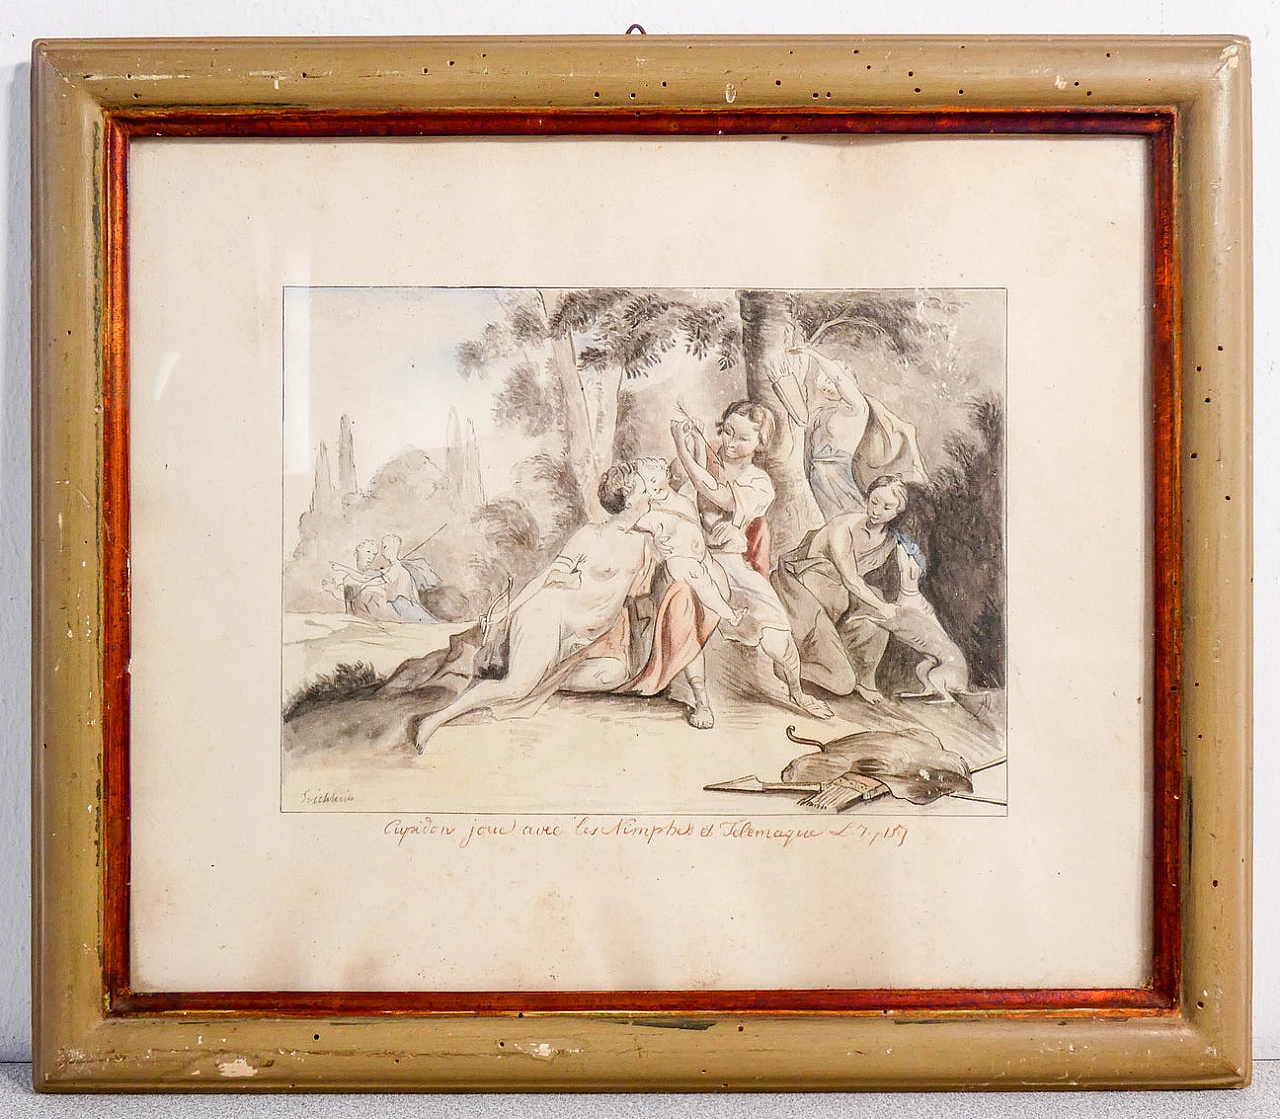 Cupid playing with the Nimphes and Telemachus, watercolour and pencil on paper, 19th century 1